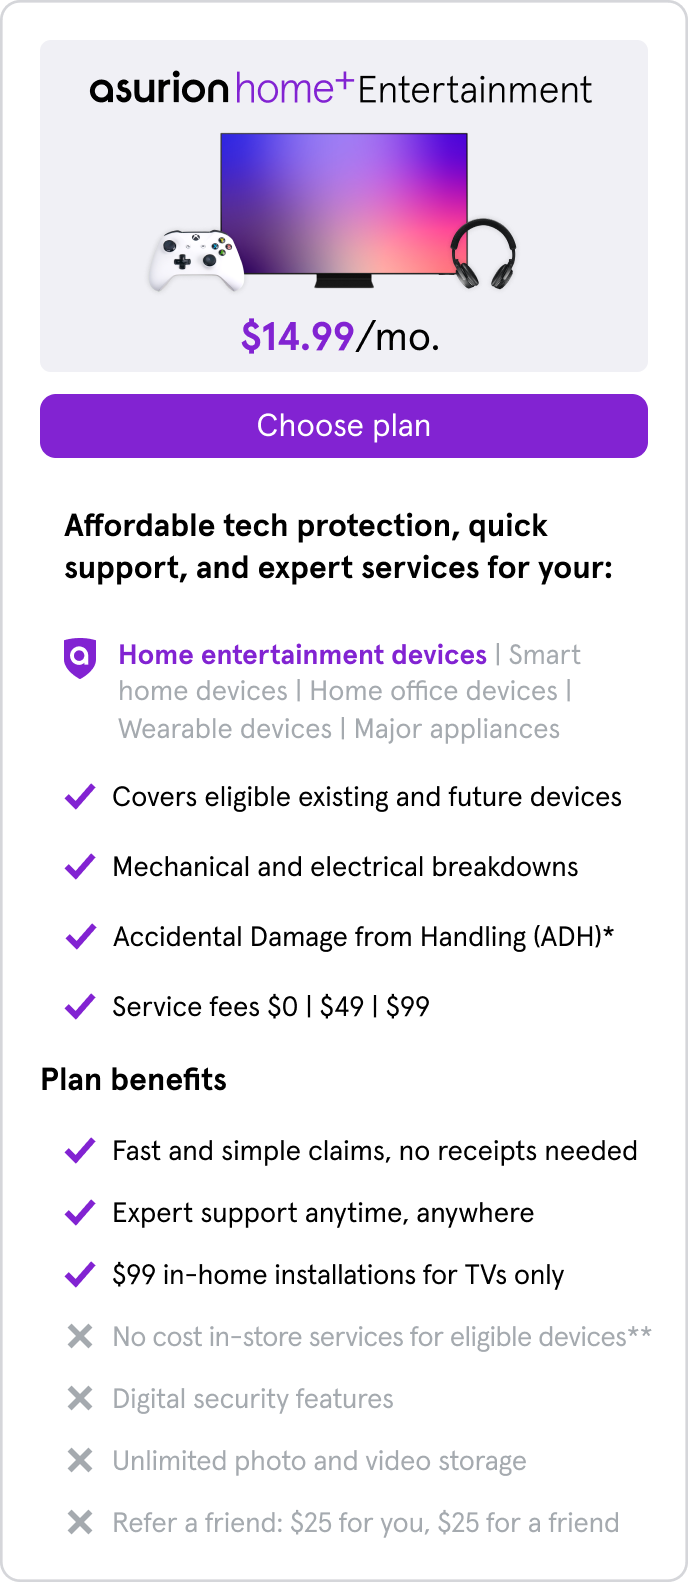 Home+ Entertainment. $14.99/mo. Home entertainment devices only. Covers eligible existing & future devices,mechanical/electrical breakdowns,accidental damage from handling. $0/$49/$99 service fees. Fast claims,no receipts needed. $99 in-home TV installs.